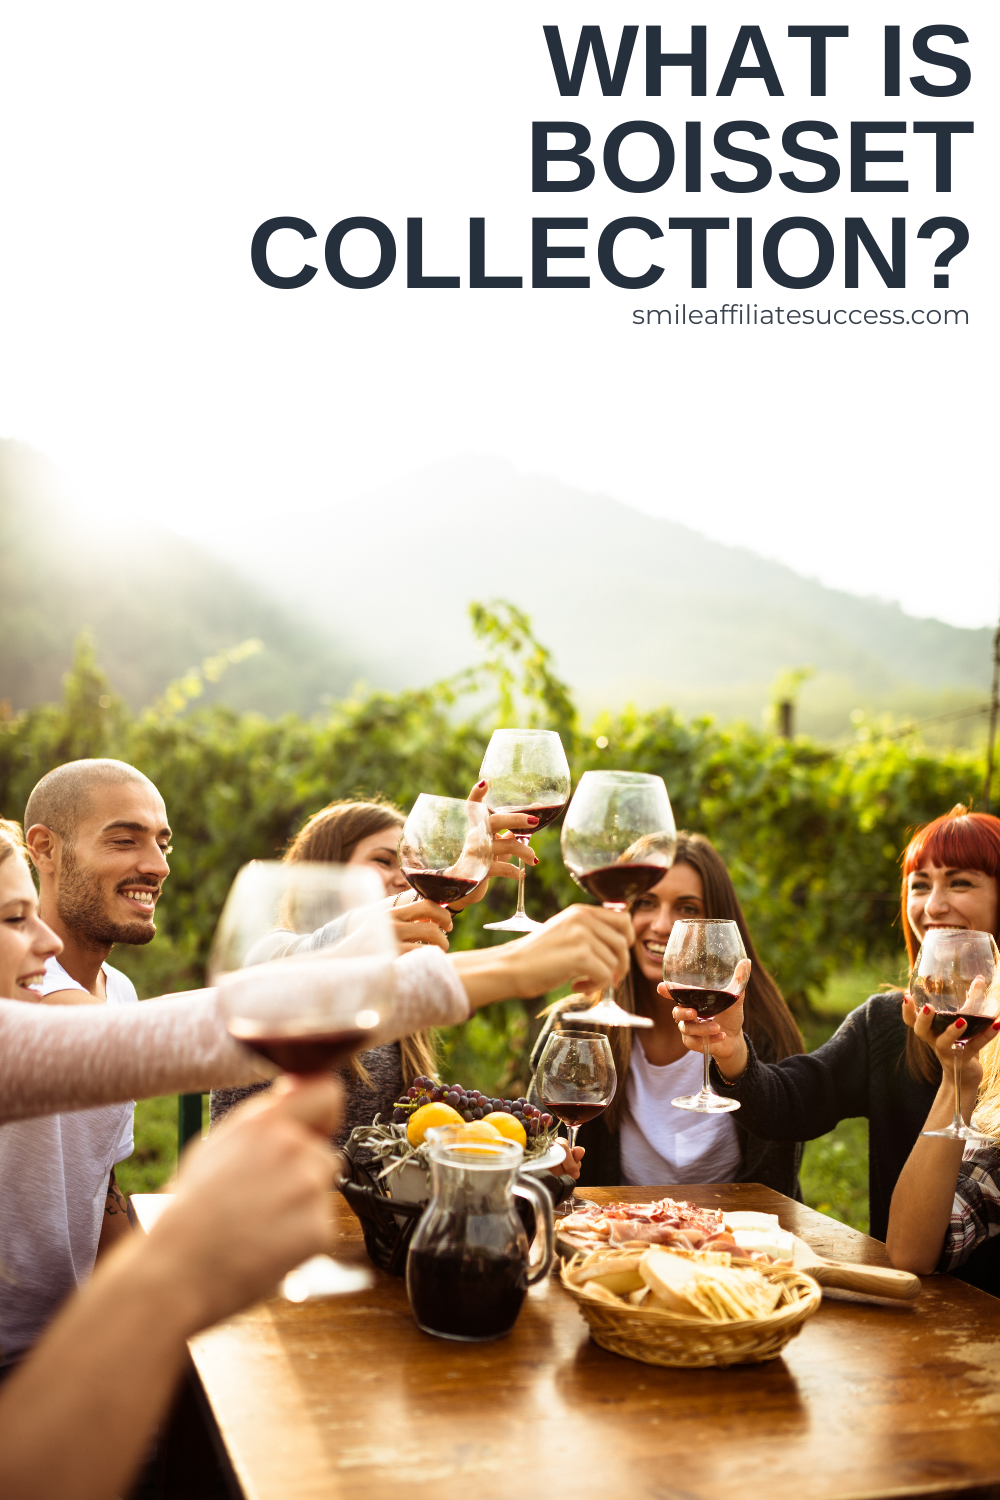 What Is Boisset Collection?